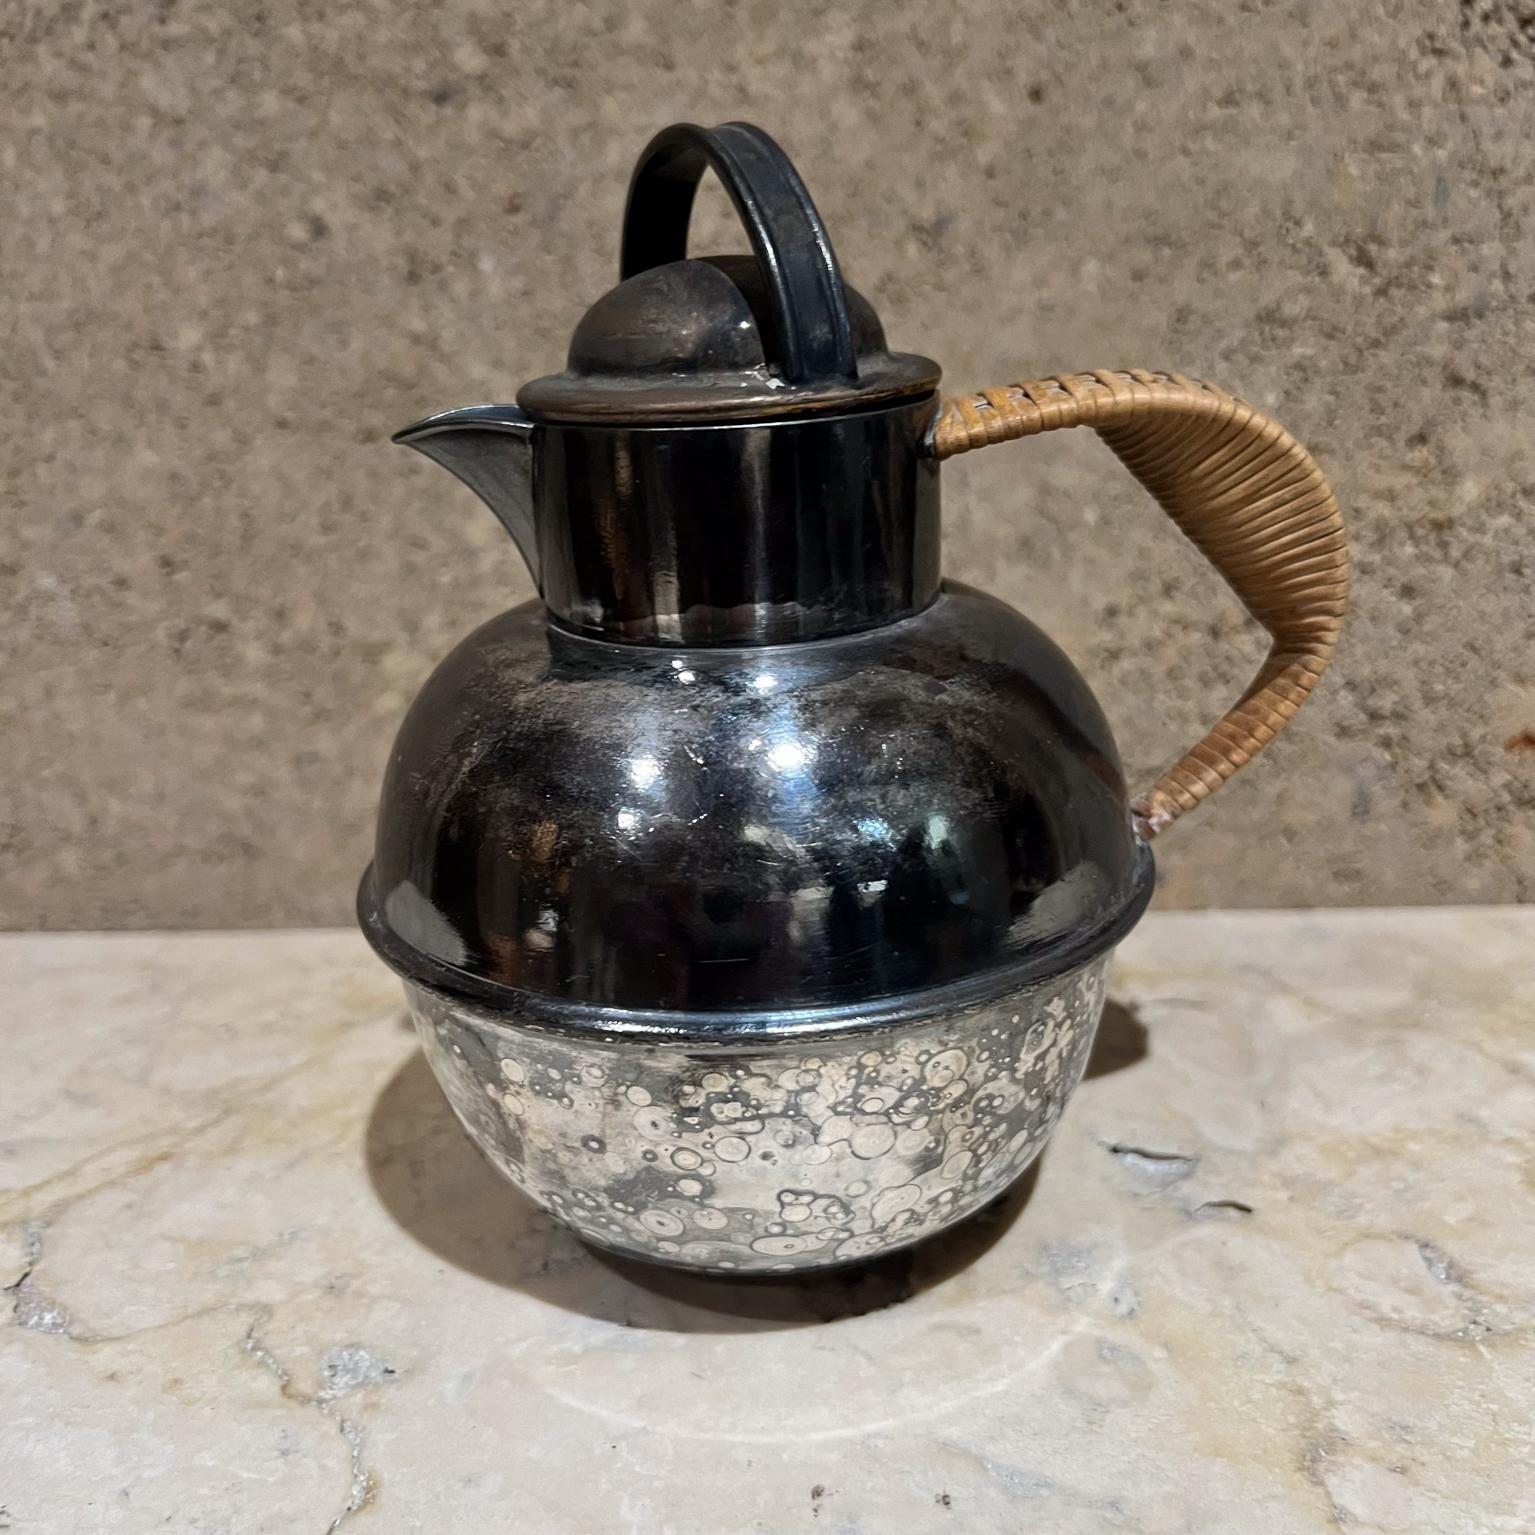 Antique E.G. Webster & Son (c 1886-1928) Silver Plate Creamer Jug or Individual Tea Pot.
International Silver Company
Handle that is wrapped in rattan.
Stamped EGW&S
6 h x 4 diameter x 5 d
Vintage wear present discoloration.
Refer to all images.